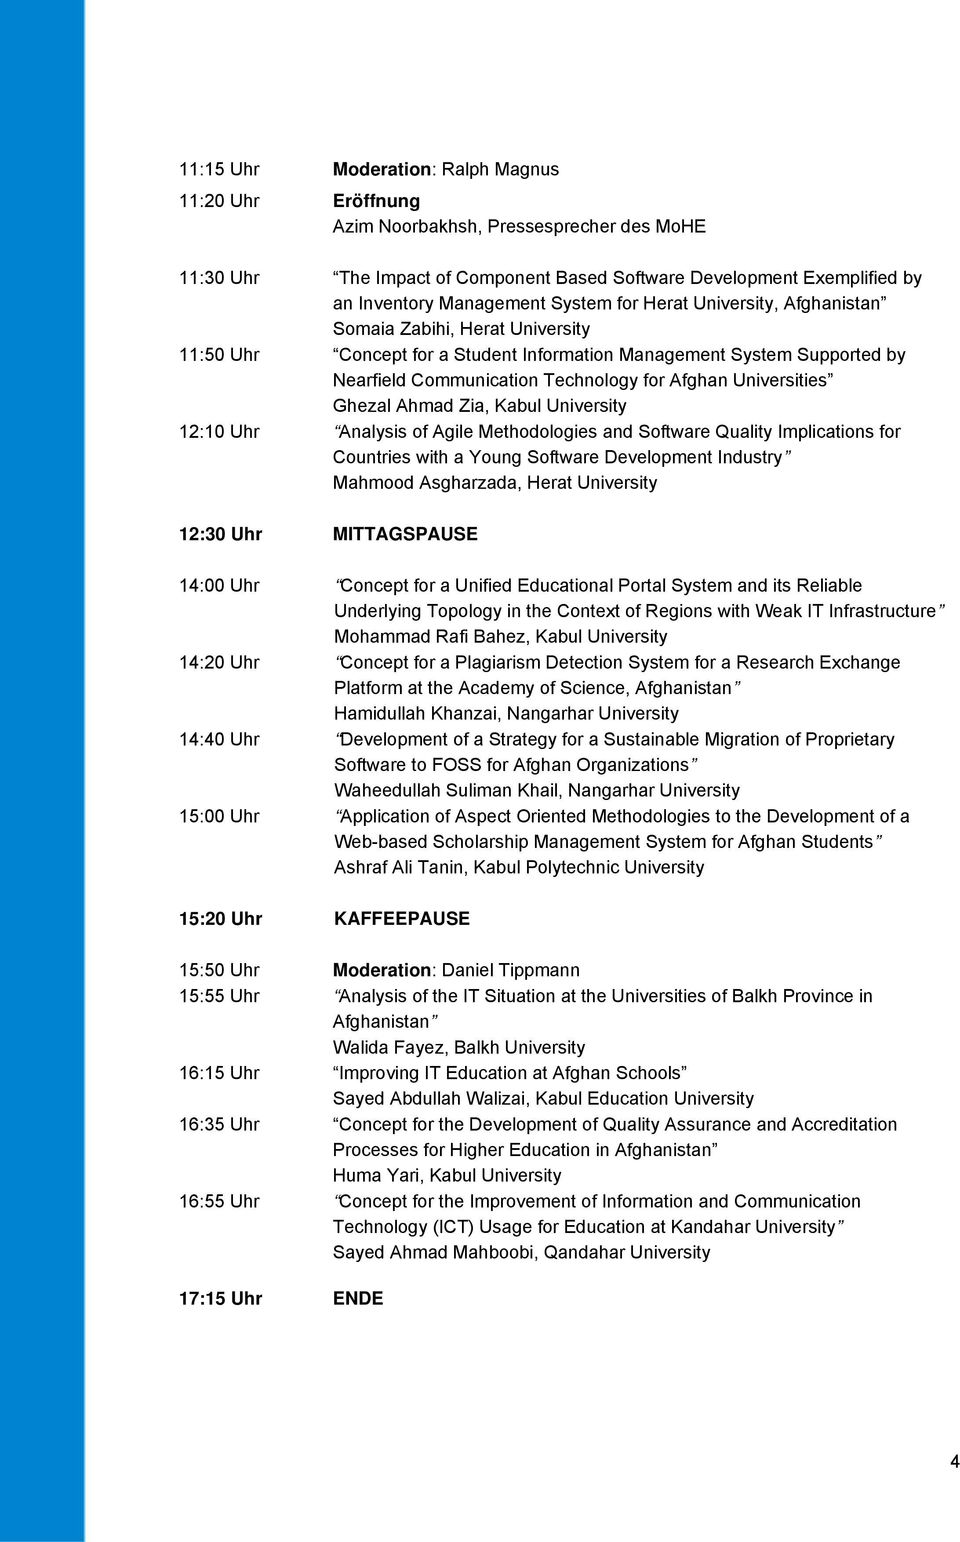 Universities Ghezal Ahmad Zia, Kabul University 12:10 Uhr Analysis of Agile Methodologies and Software Quality Implications for Countries with a Young Software Development Industry Mahmood